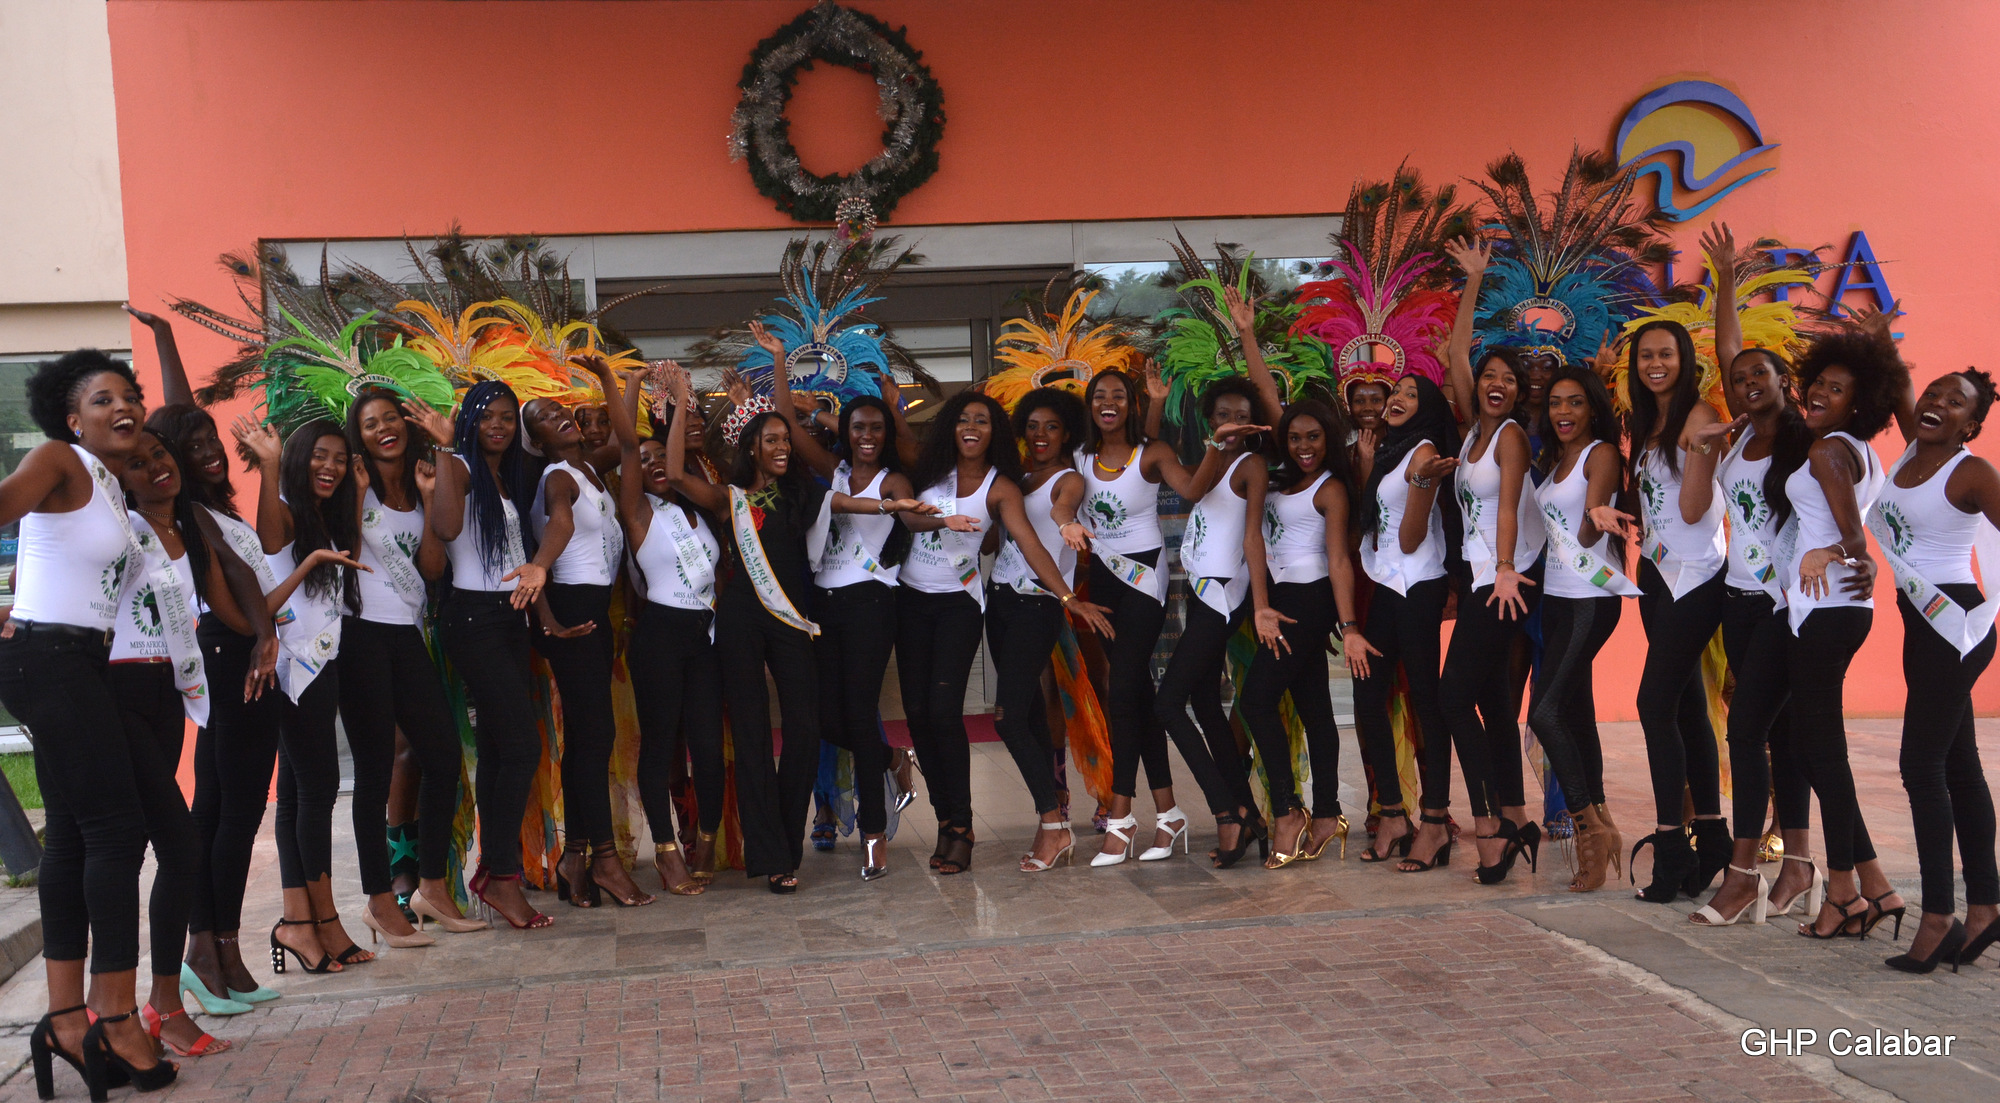 NIGERIA: 27 COUNTRIES STORM CALABAR FOR MISS AFRICA BEAUTY PAGEANT